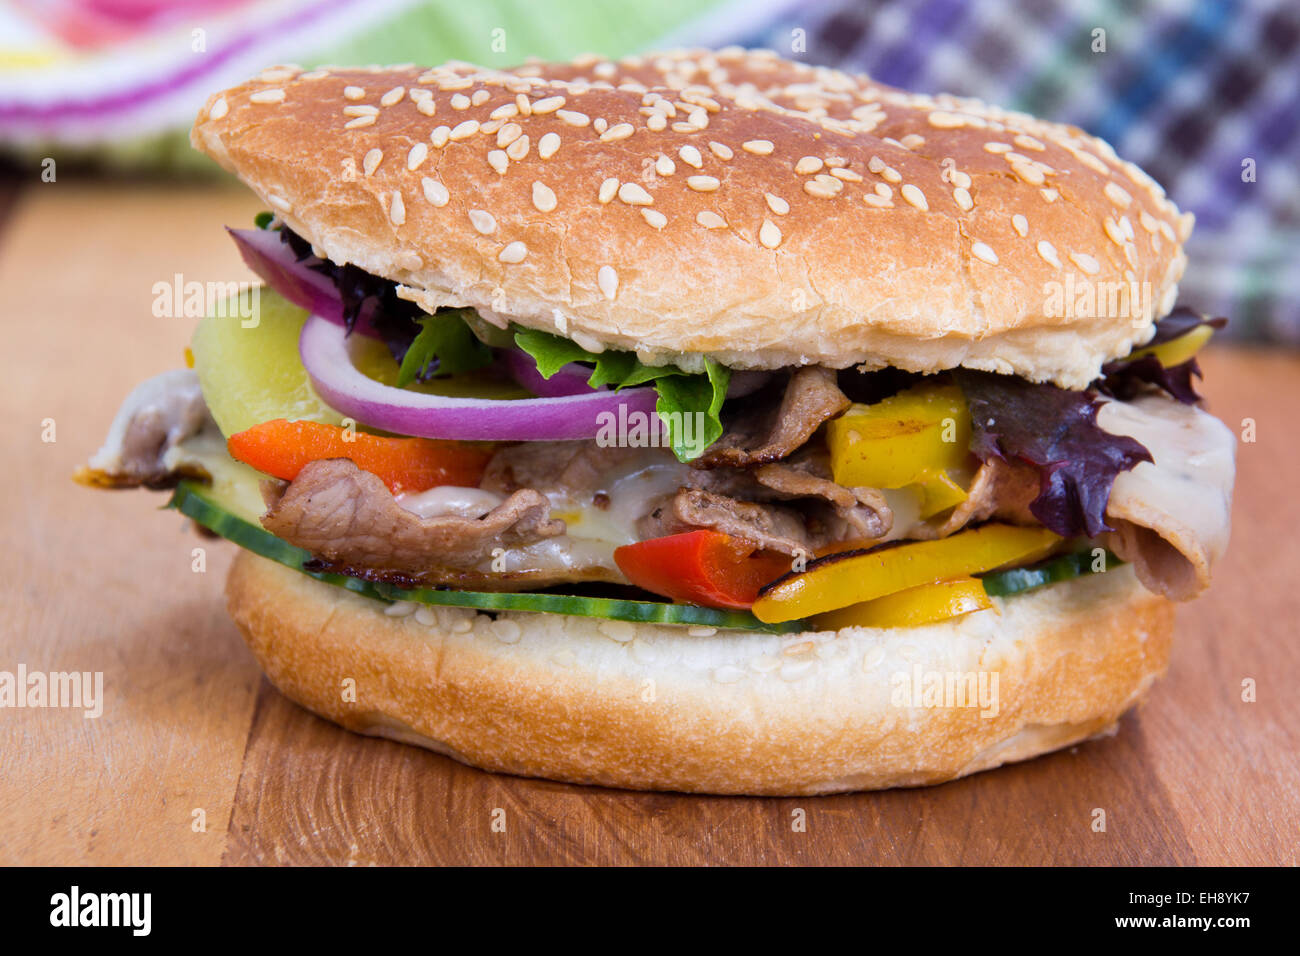 philly cheese steak burger sandwich with vegetables Stock Photo